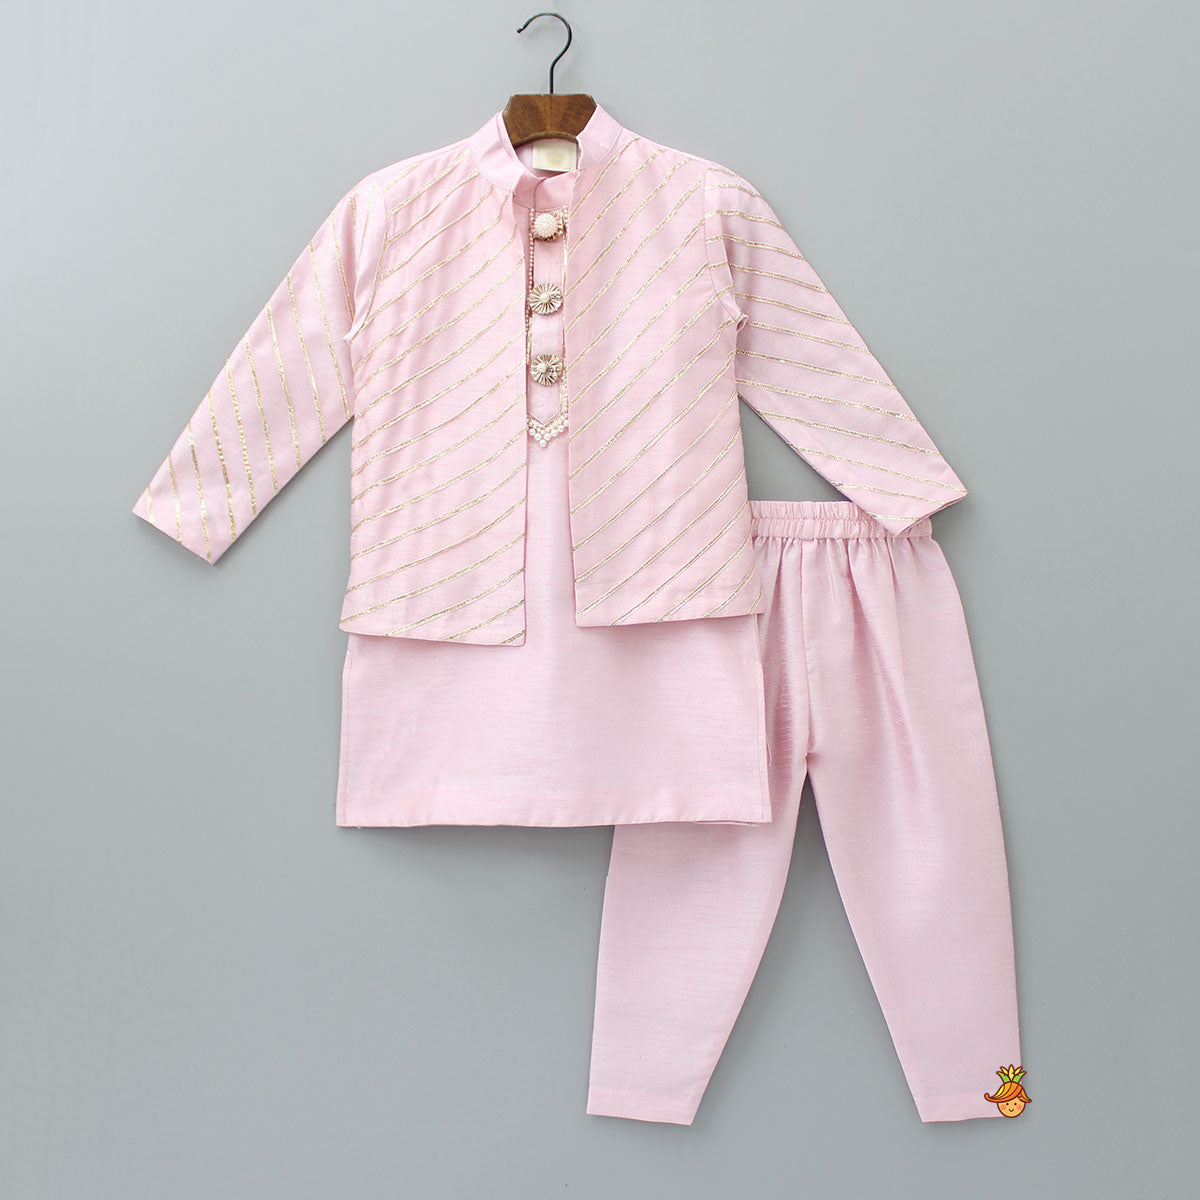 Pre Order: Exquisite Kurta With Gota Lace Detailed Jacket And Pyjama